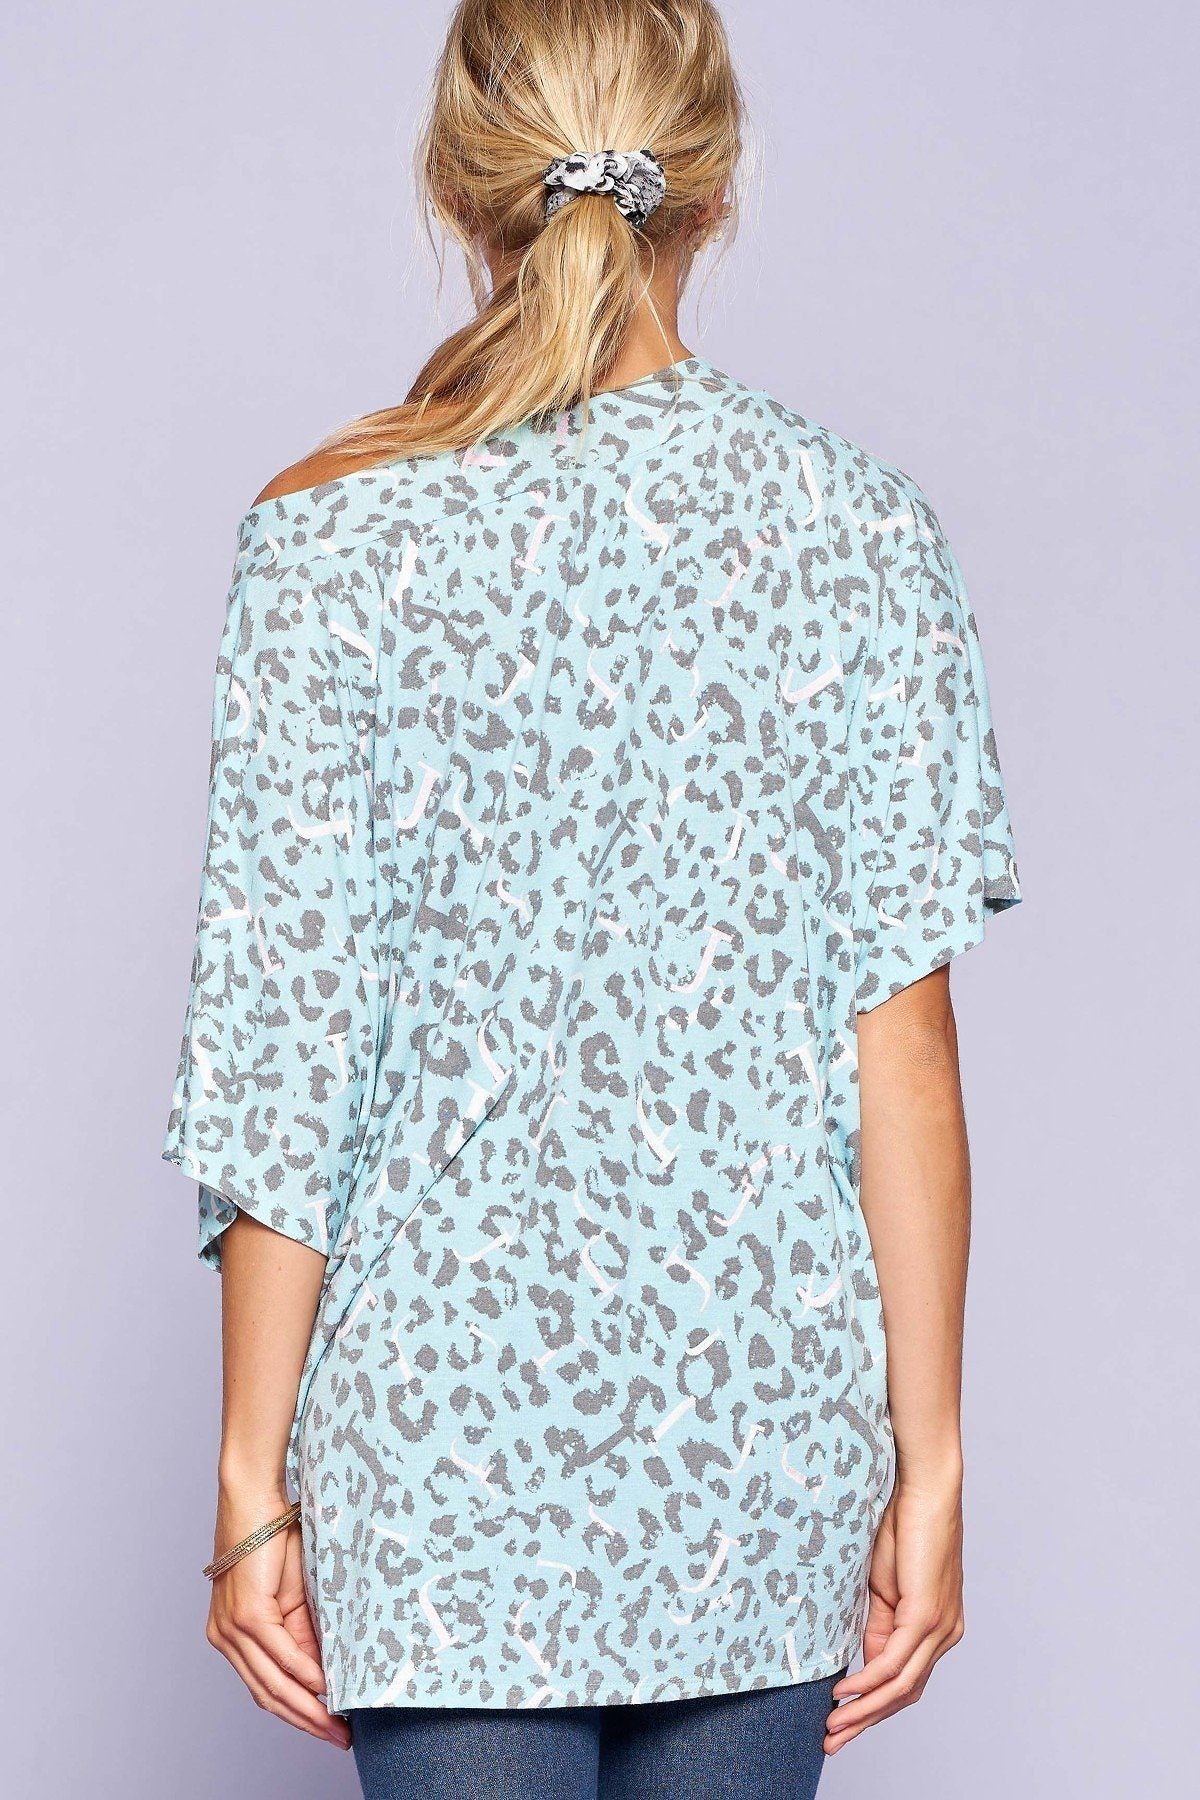 Leopard And Letter Printed Knit Top Leopard And Letter Printed Knit Top - M&R CORNER M&R CORNER